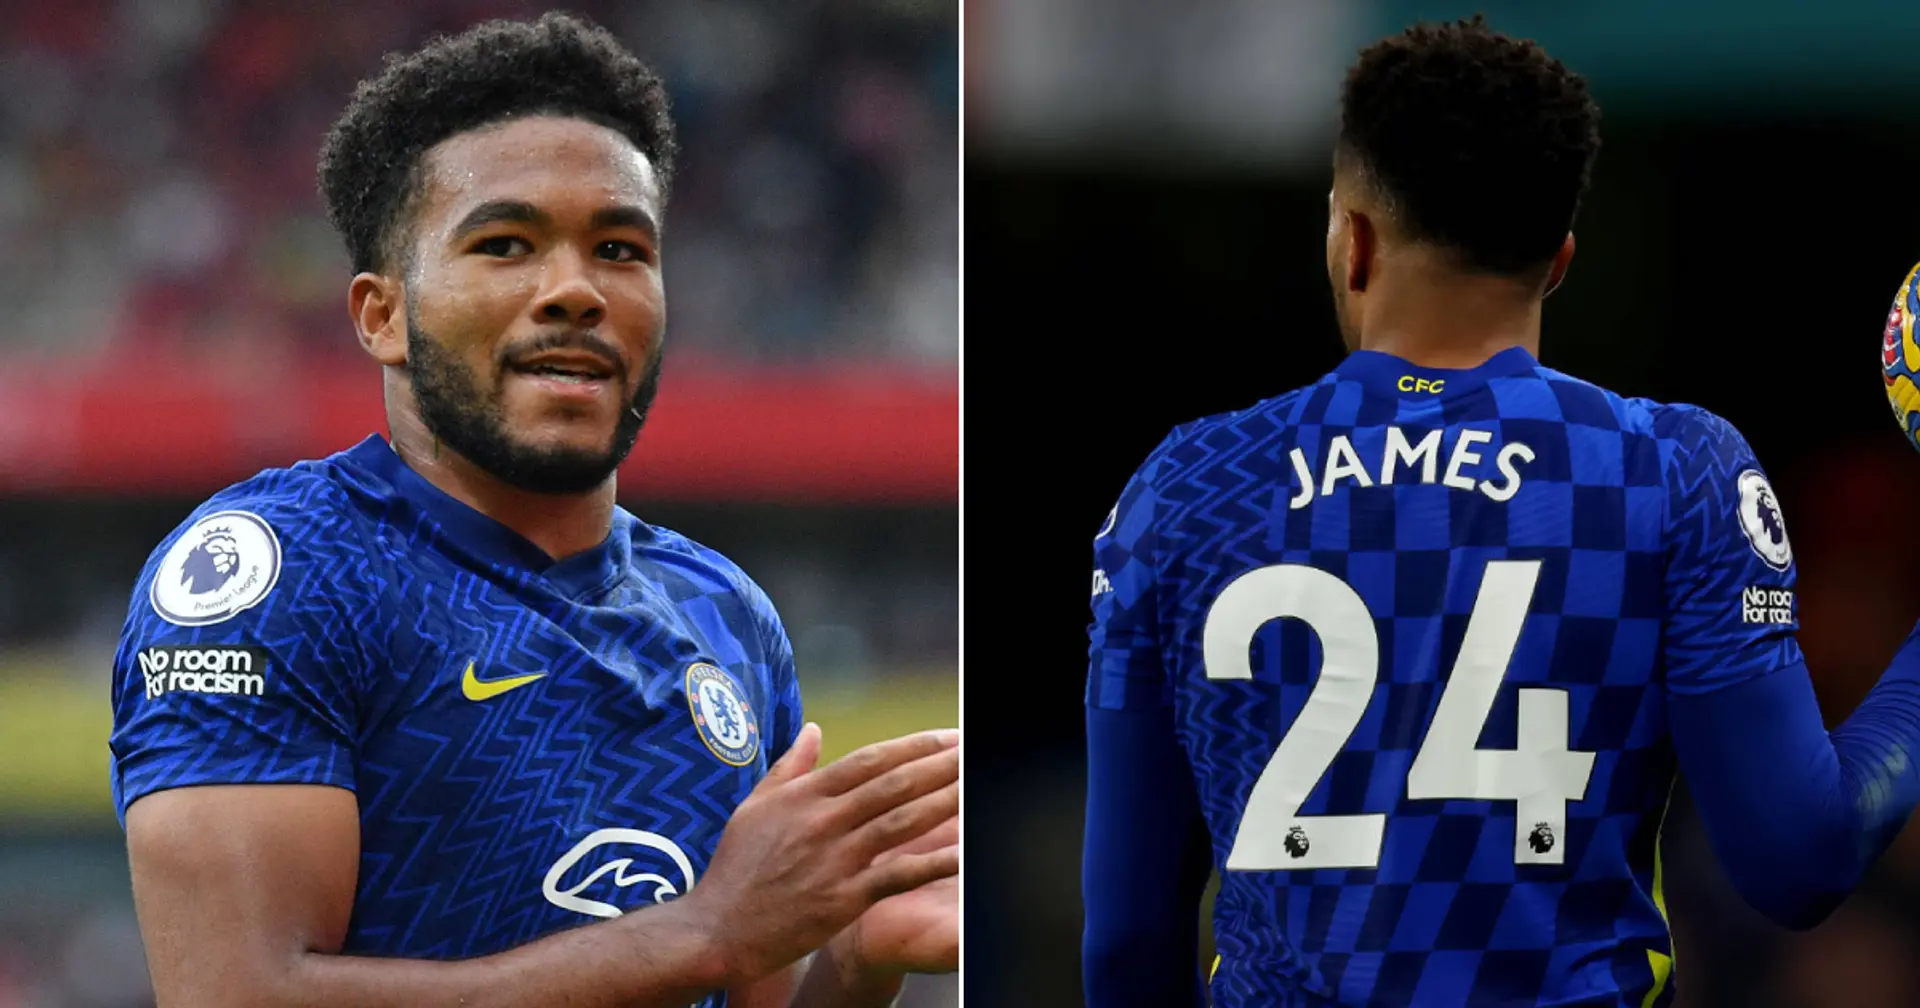 Reece James looks set for new shirt number as Chelsea prepare new kit unveiling